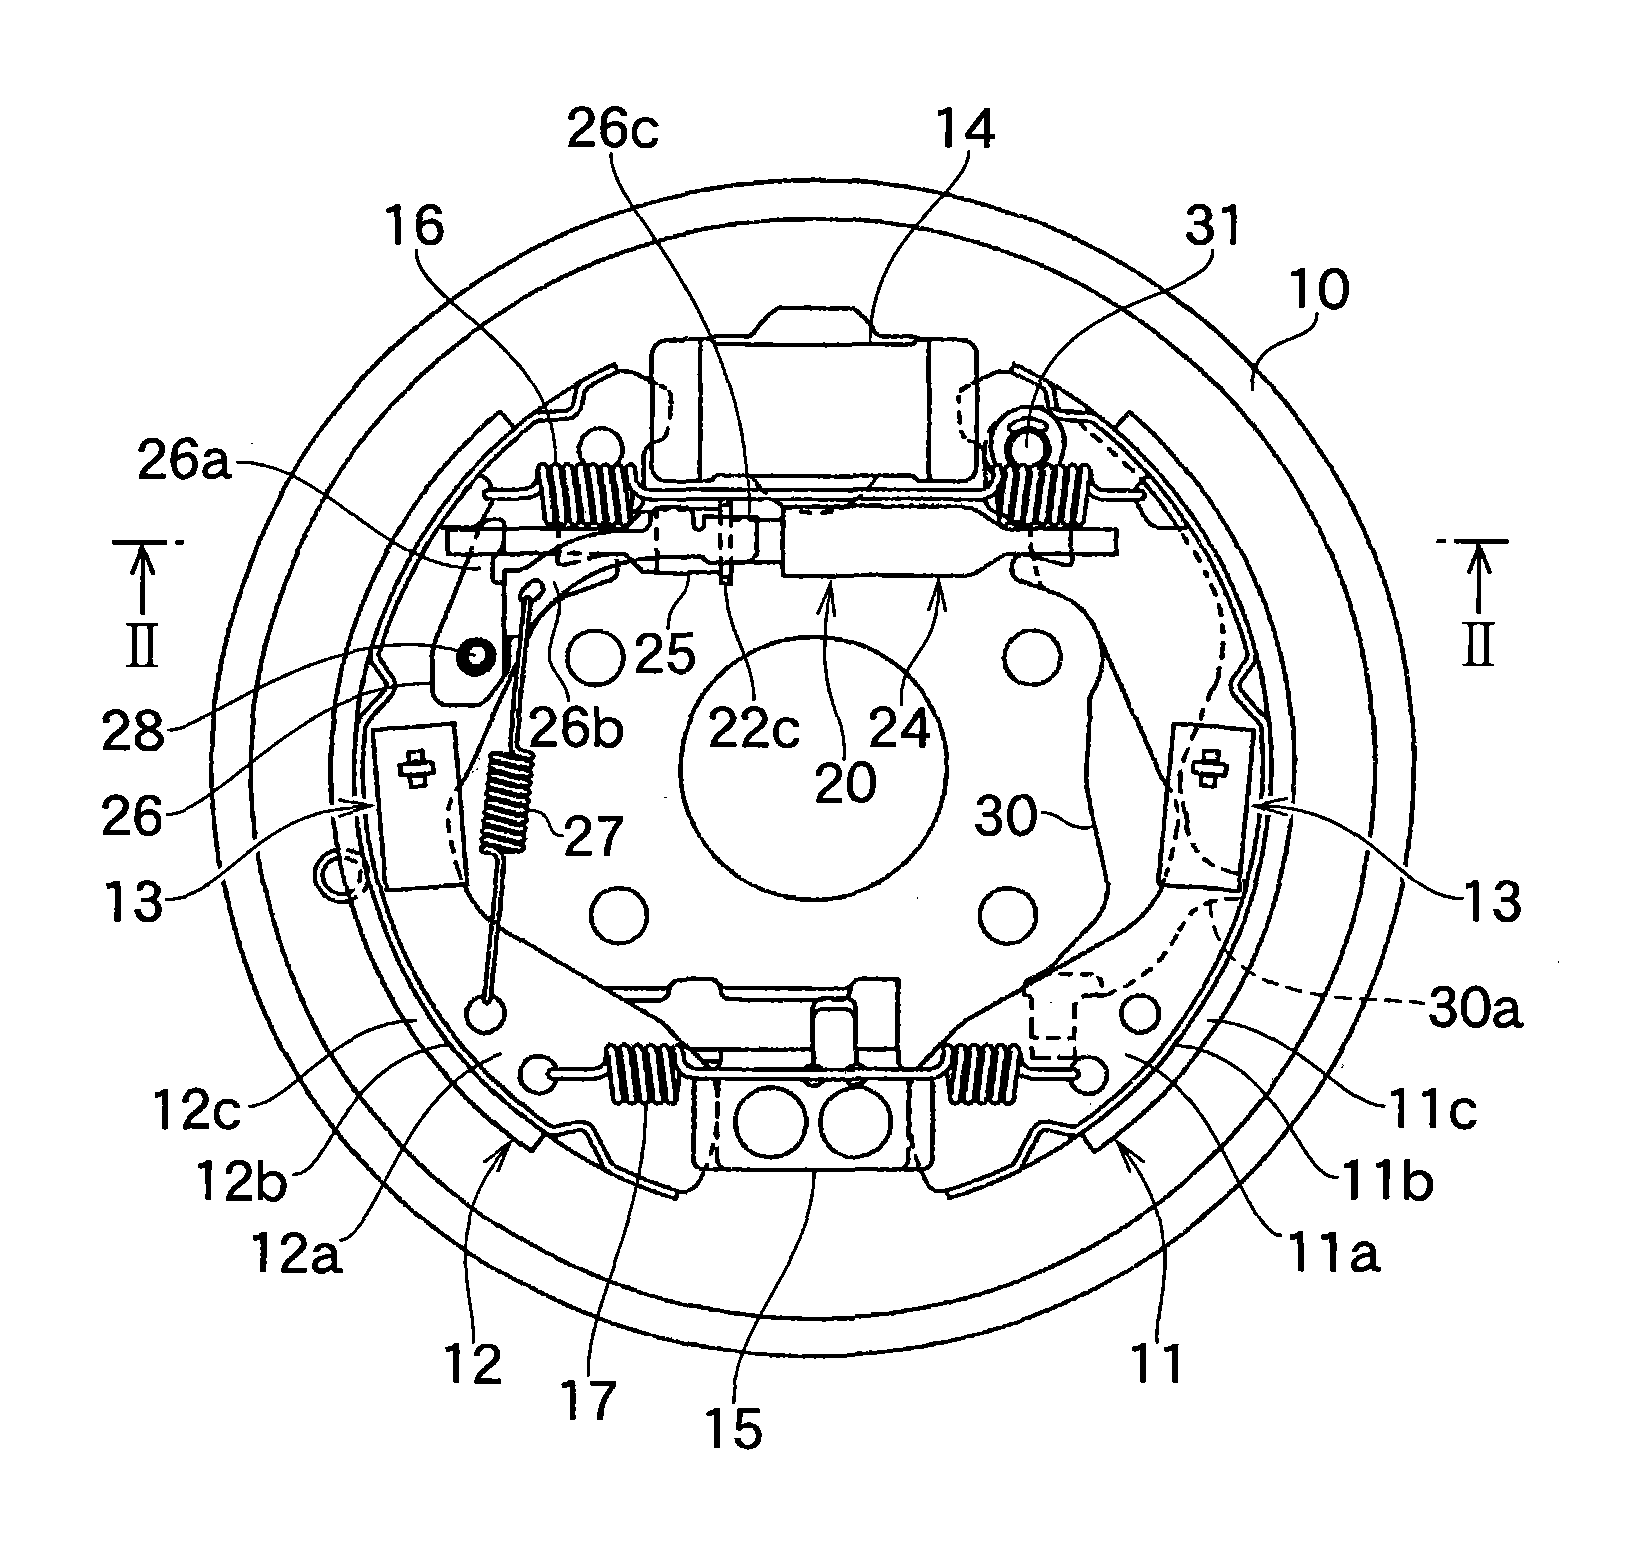 Automatic adjustment device for shoe clearance